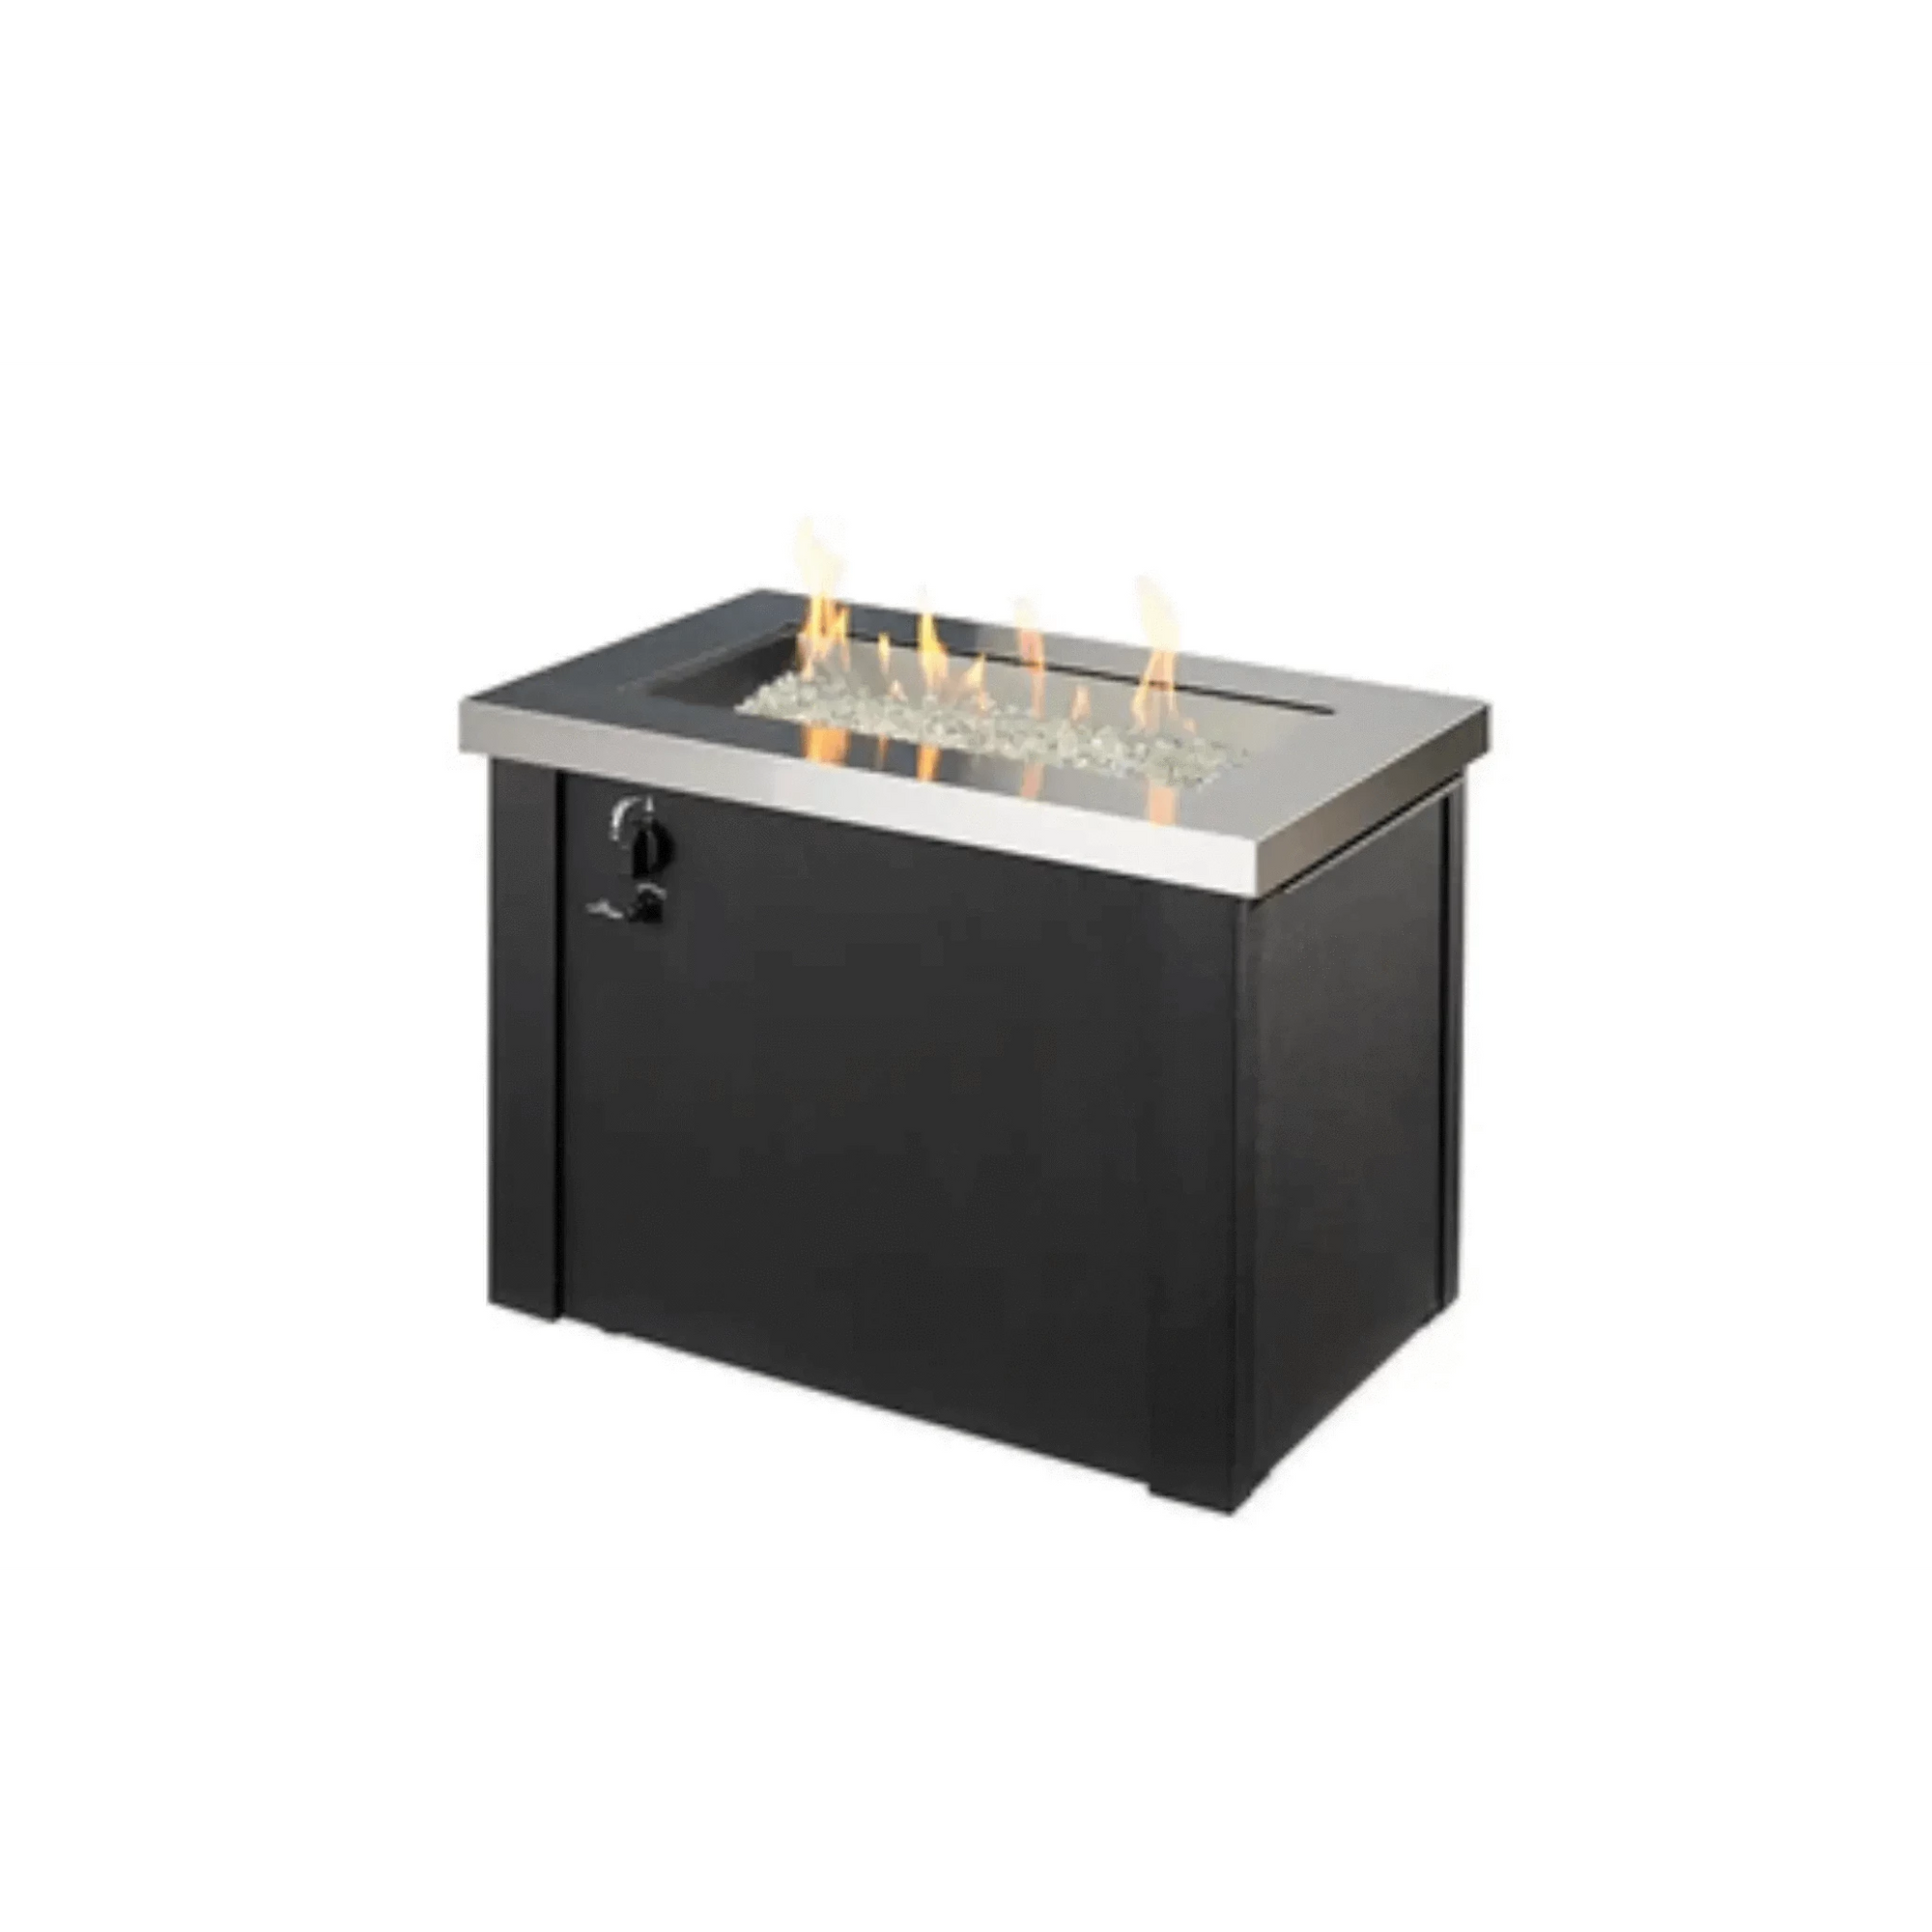 Outdoor GreatRoom Stainless Steel Providence Rectangular Gas Fire Pit Table-Liquid Propane